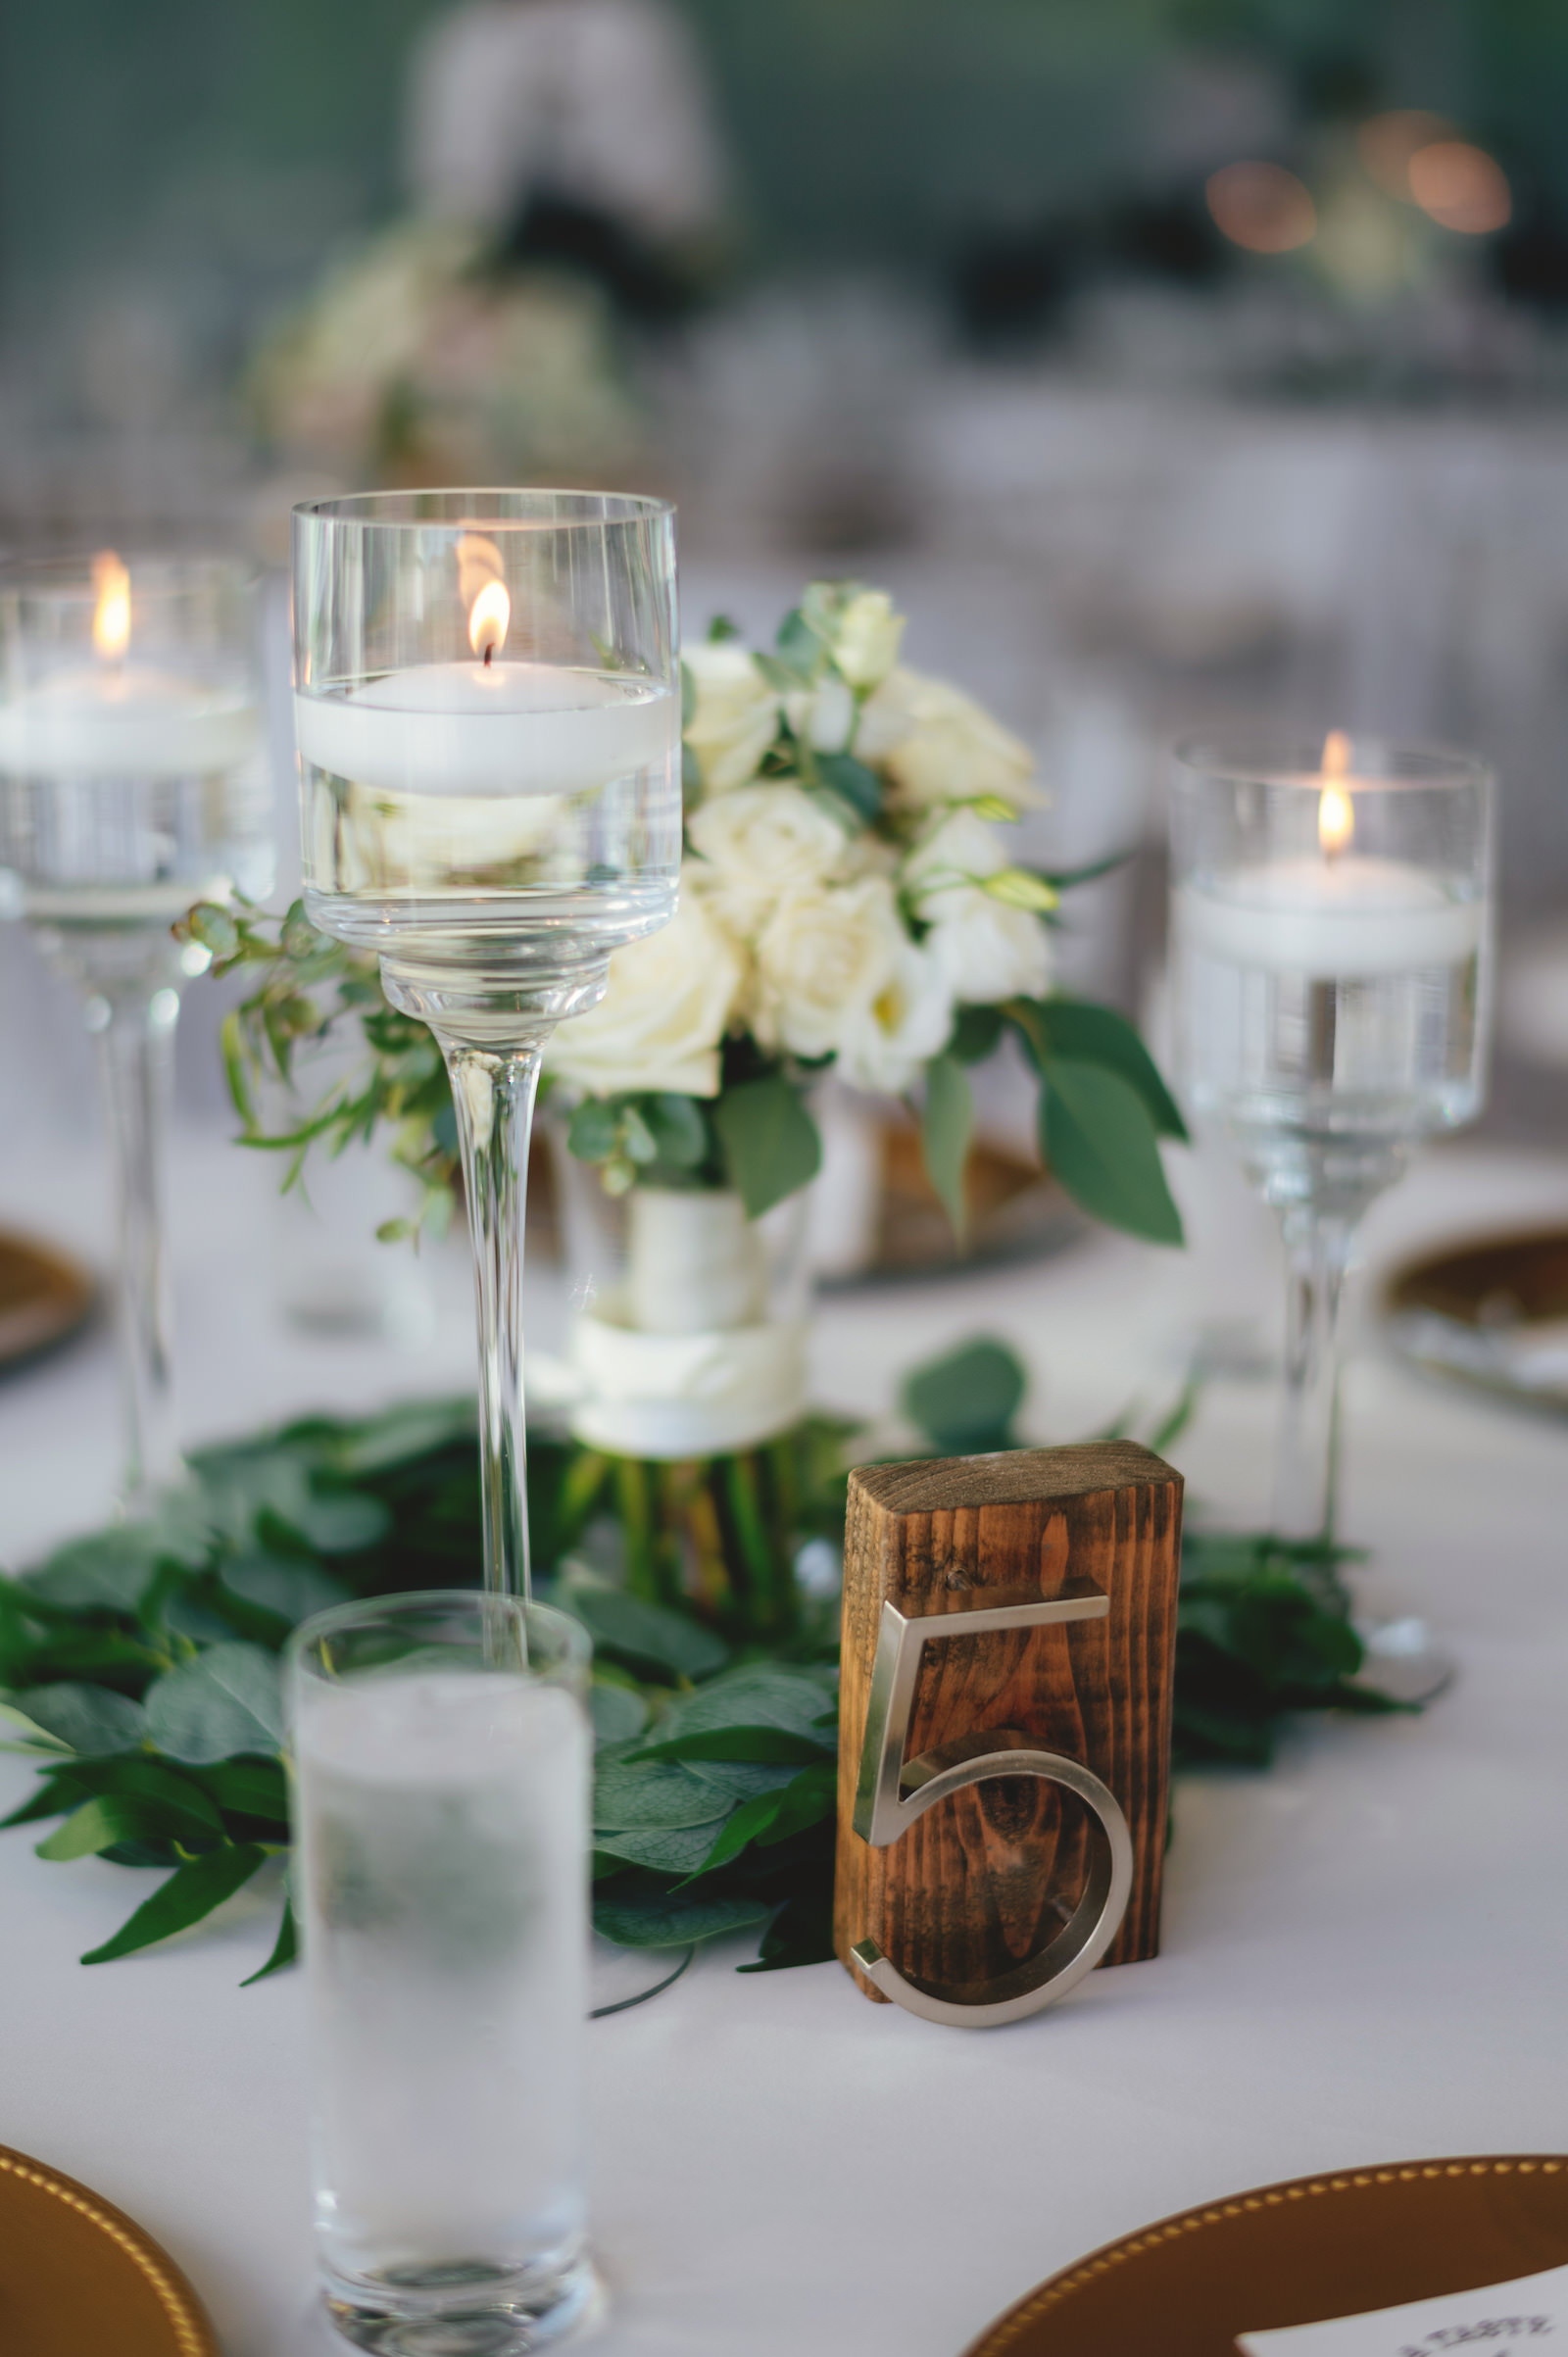 Candle Centerpieces and Wooden Modern Minimalistic Table Numbers | Elegant Reception Decor Inspiration